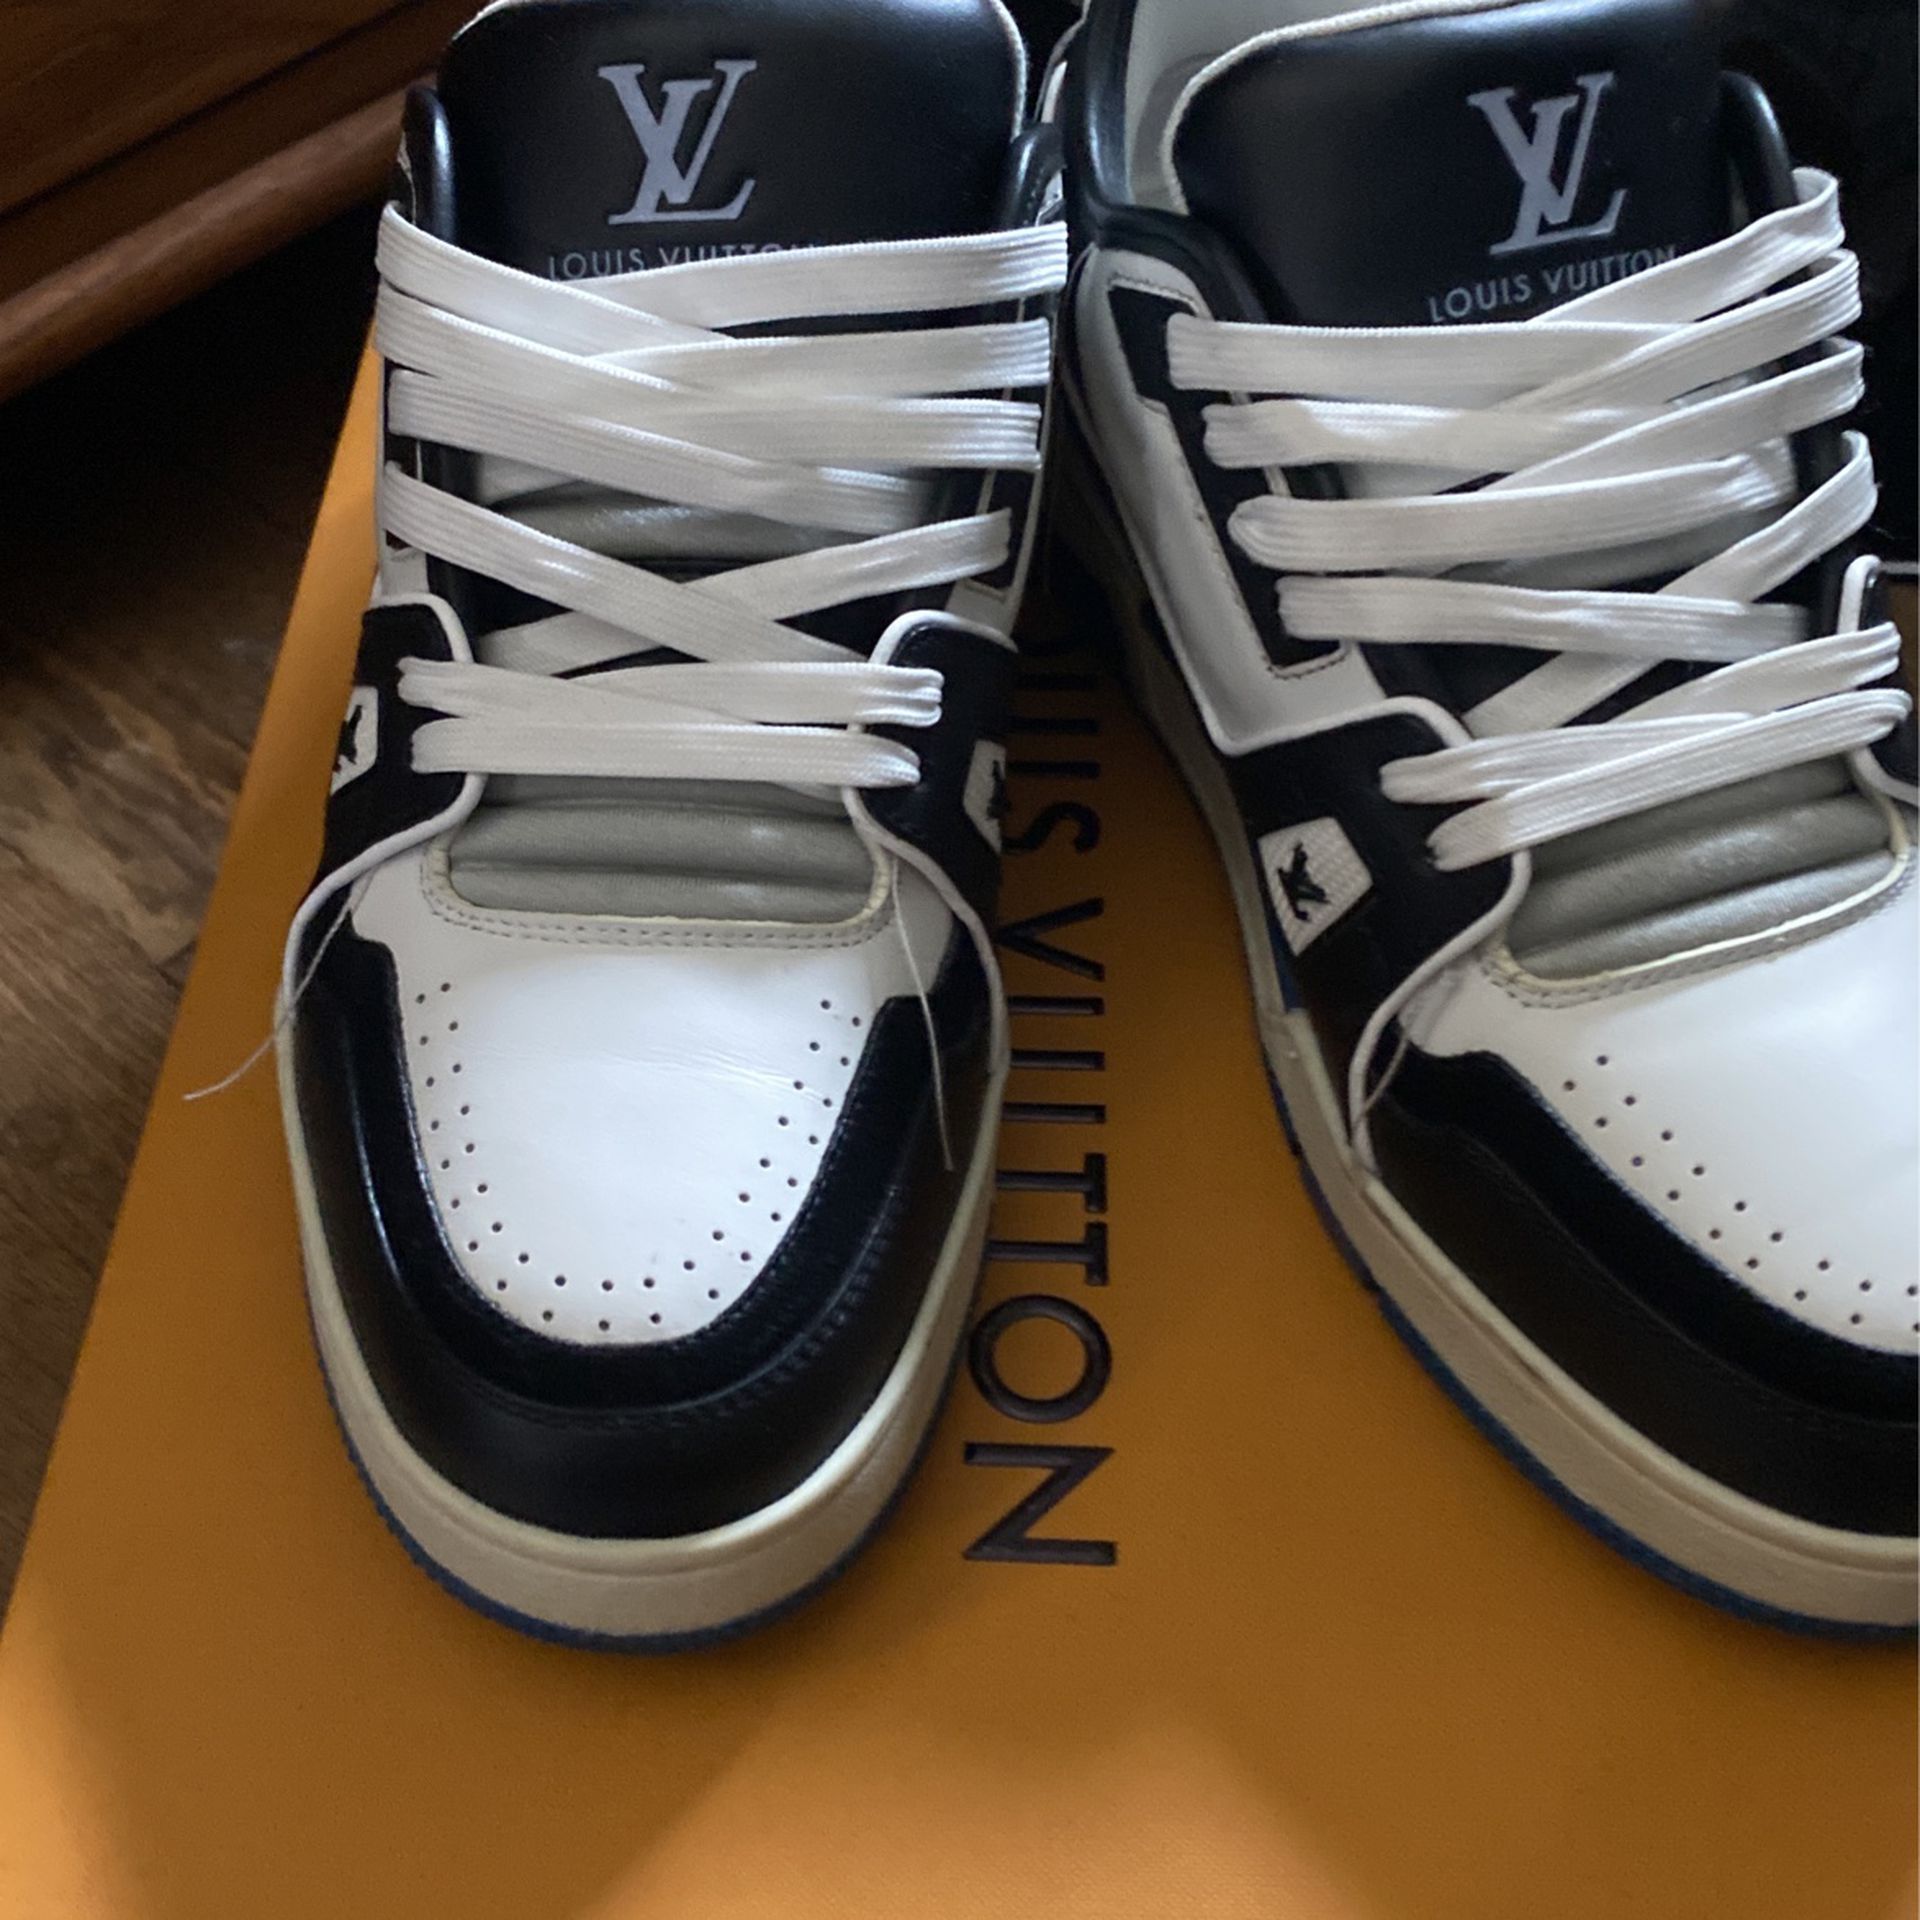 New Louis Vuitton Trainer #54 Graphic Print Blue/White Sneakers (Size:Euro  44/Men's 10/10.5/11) for Sale in Valley Stream, NY - OfferUp